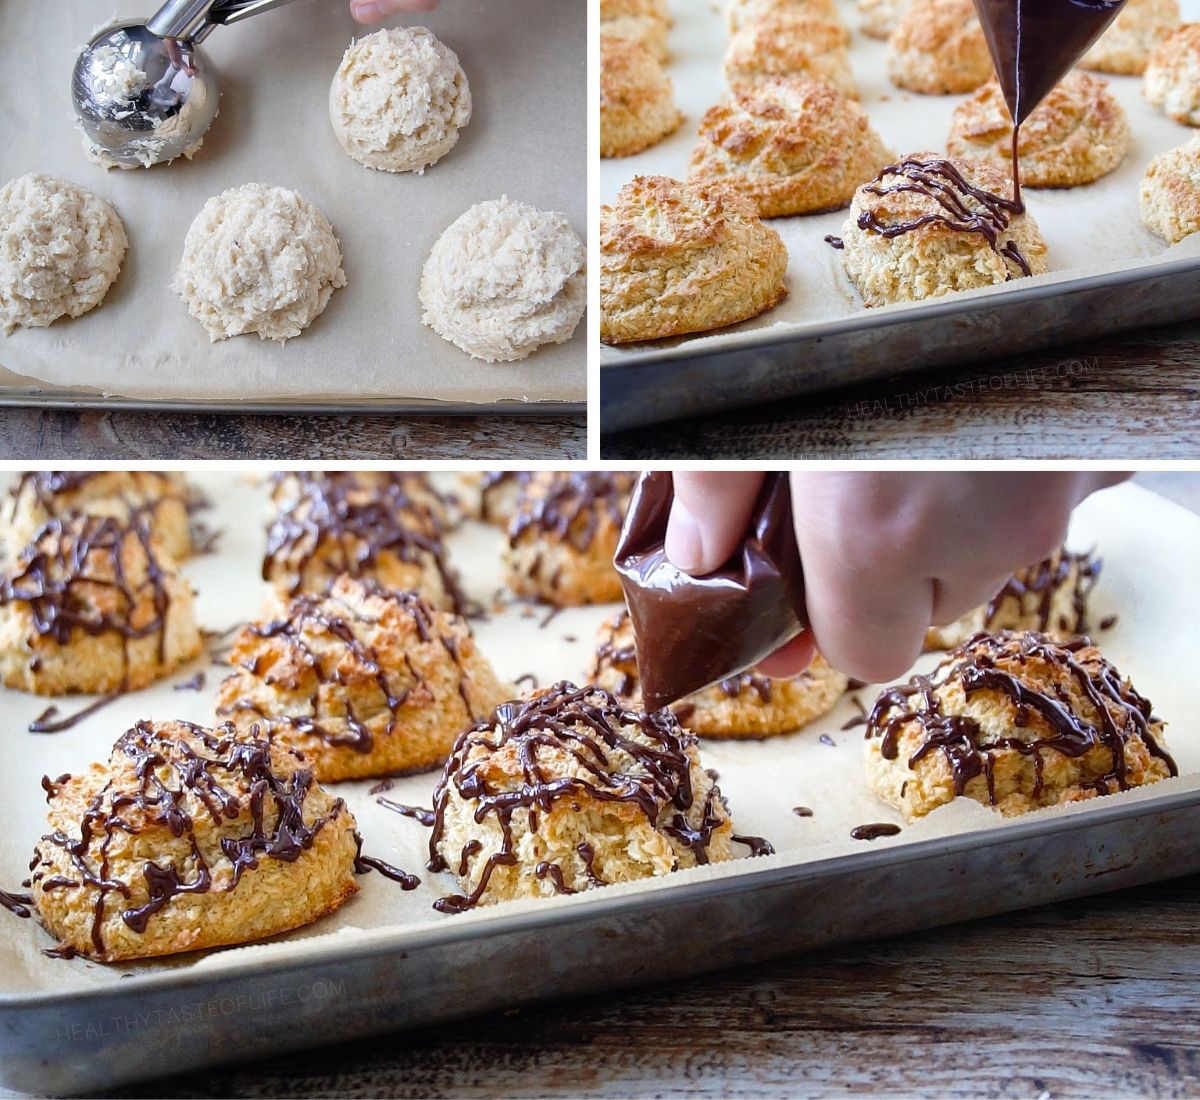 Process shots showing how to make homemade gluten free macaroons with dairy free ingredients and melted chocolate.